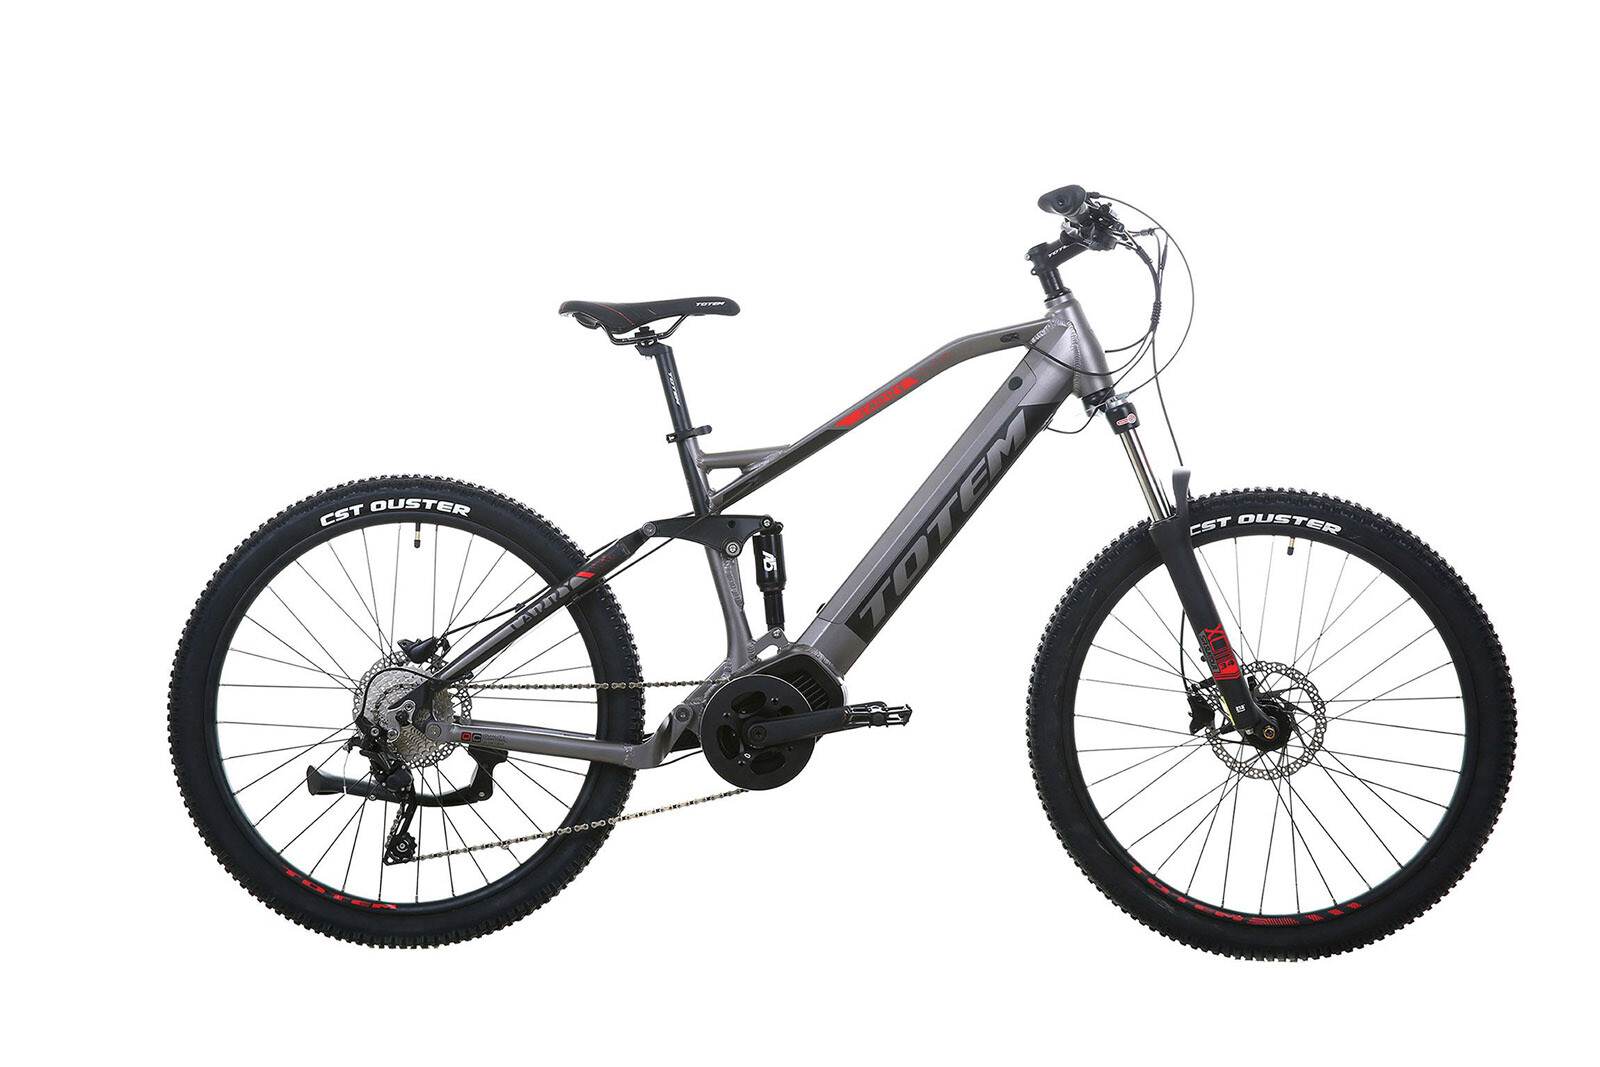 TOTEM Carry Pro 20" x 29" Dual Suspension Boost E-Bike : Grey/Black/Red